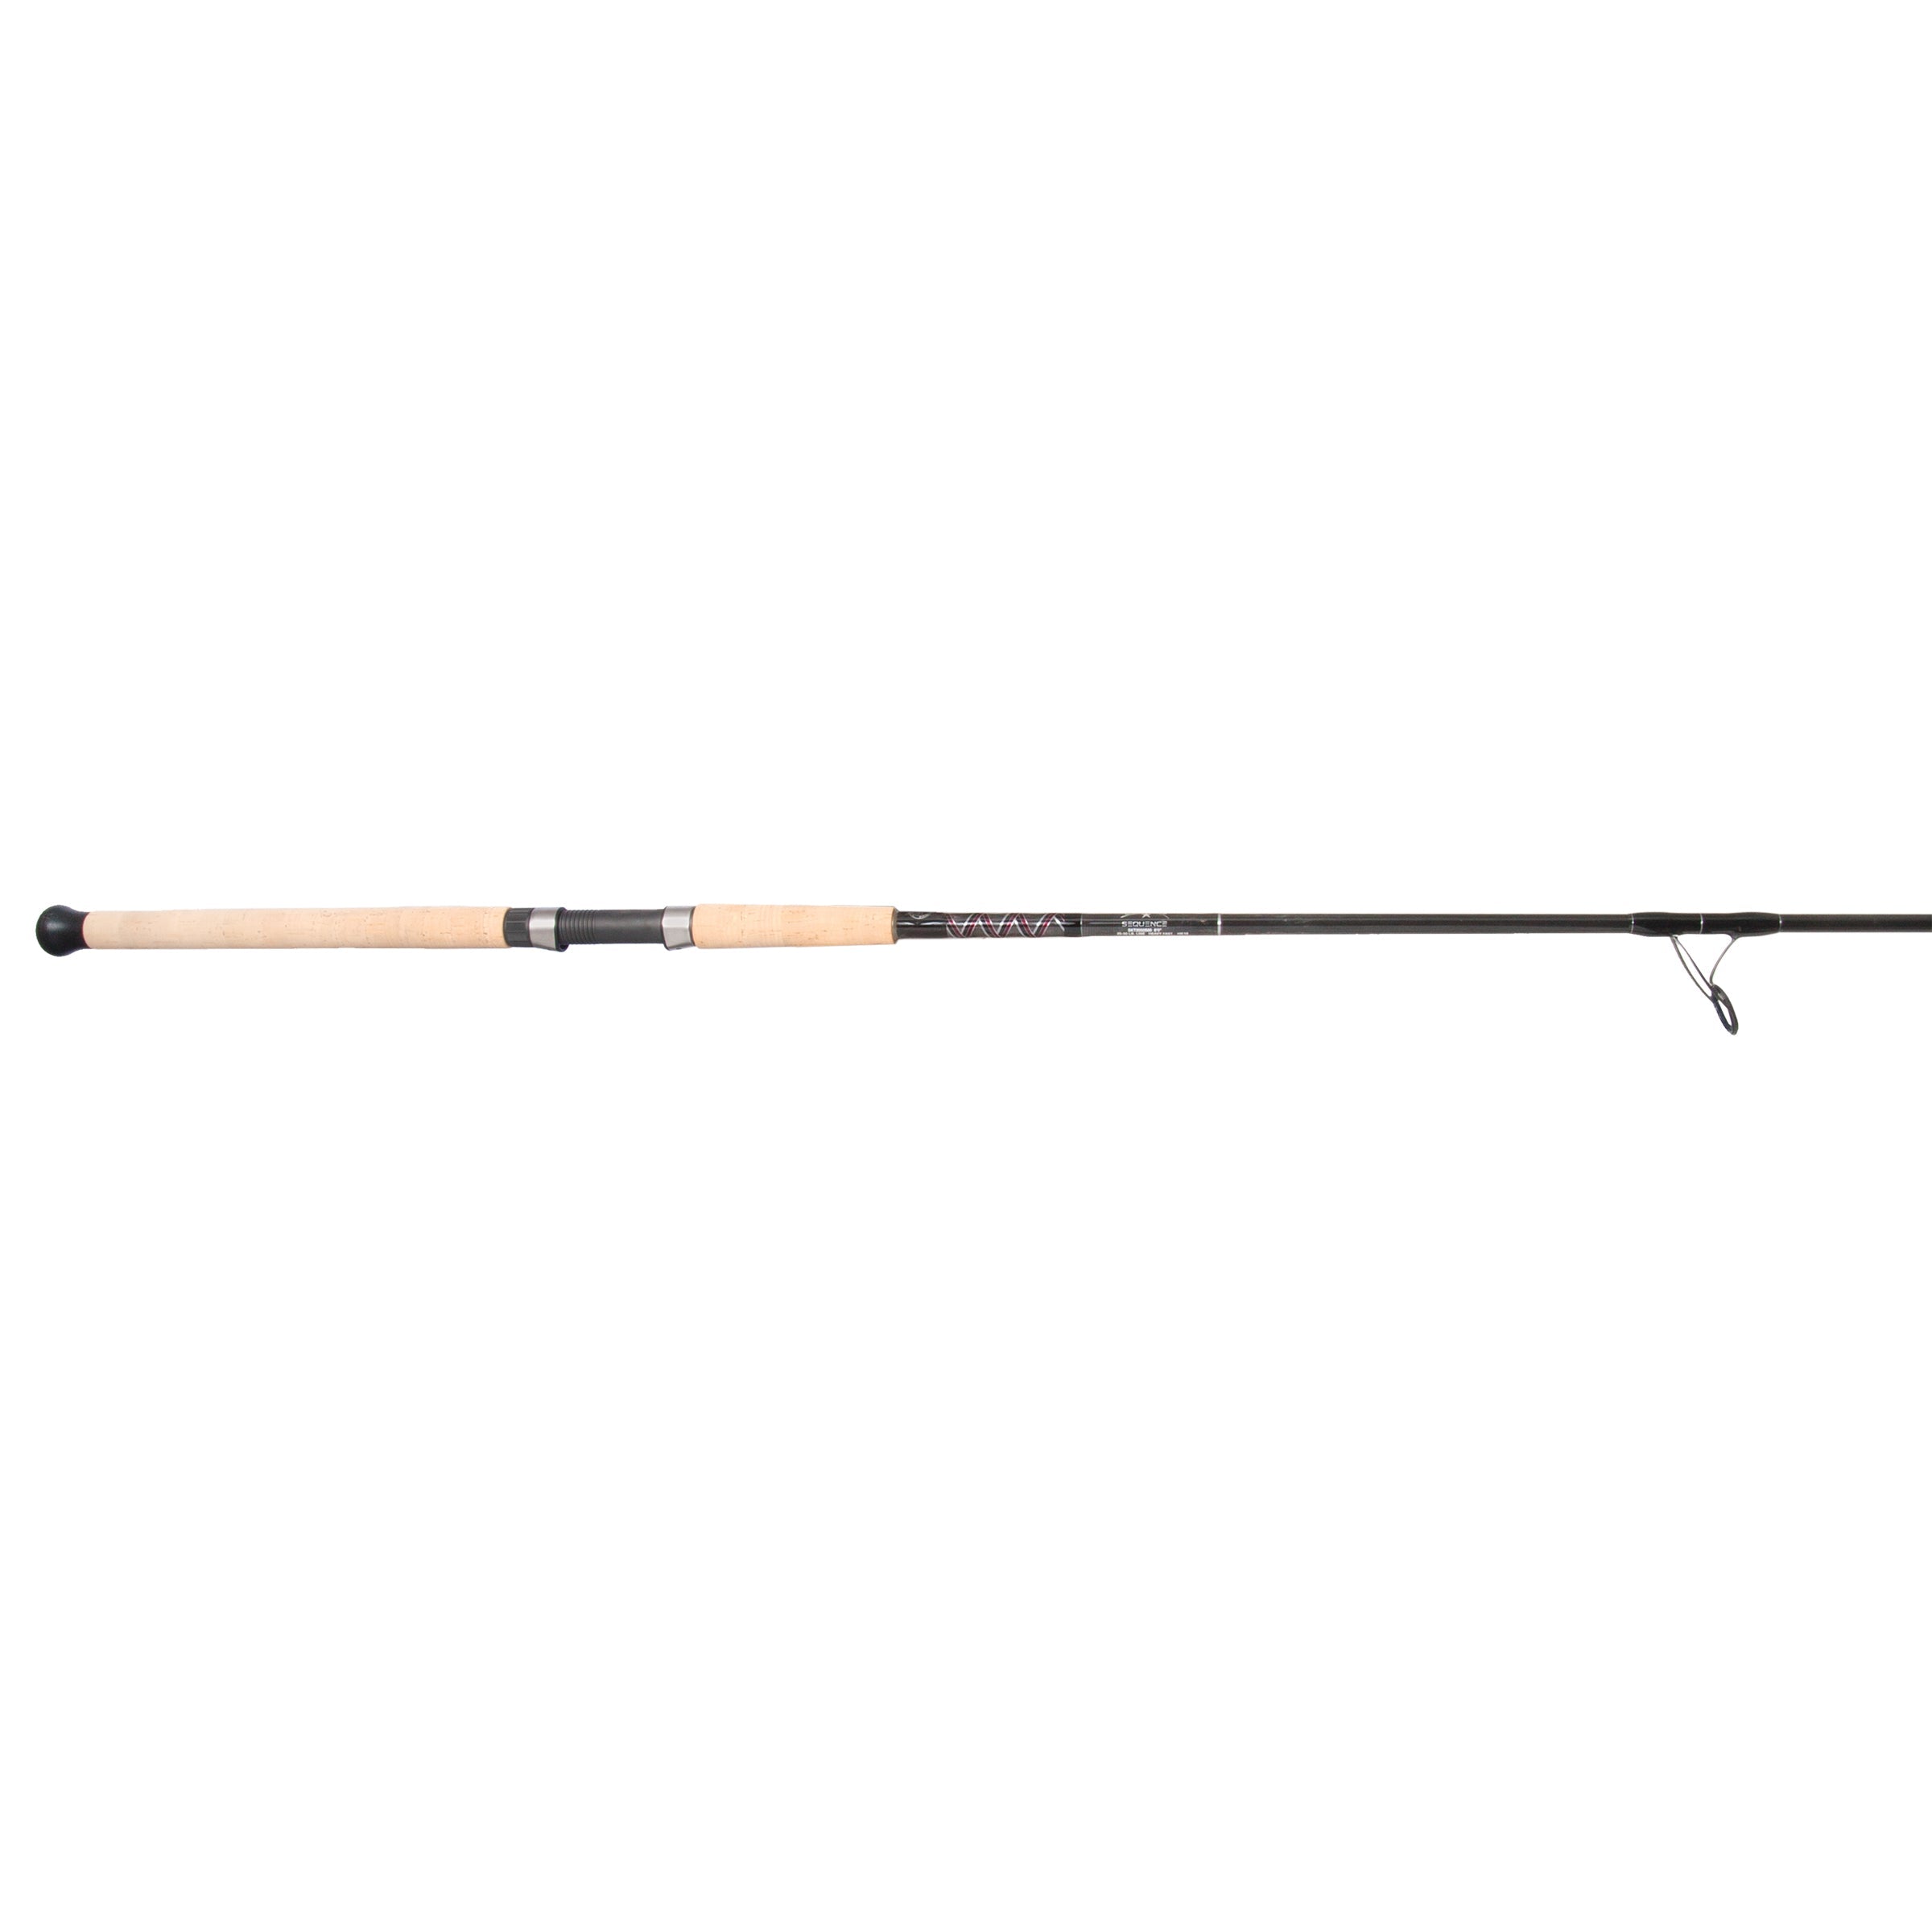 Sequence Boat Spinning Rods - Cork